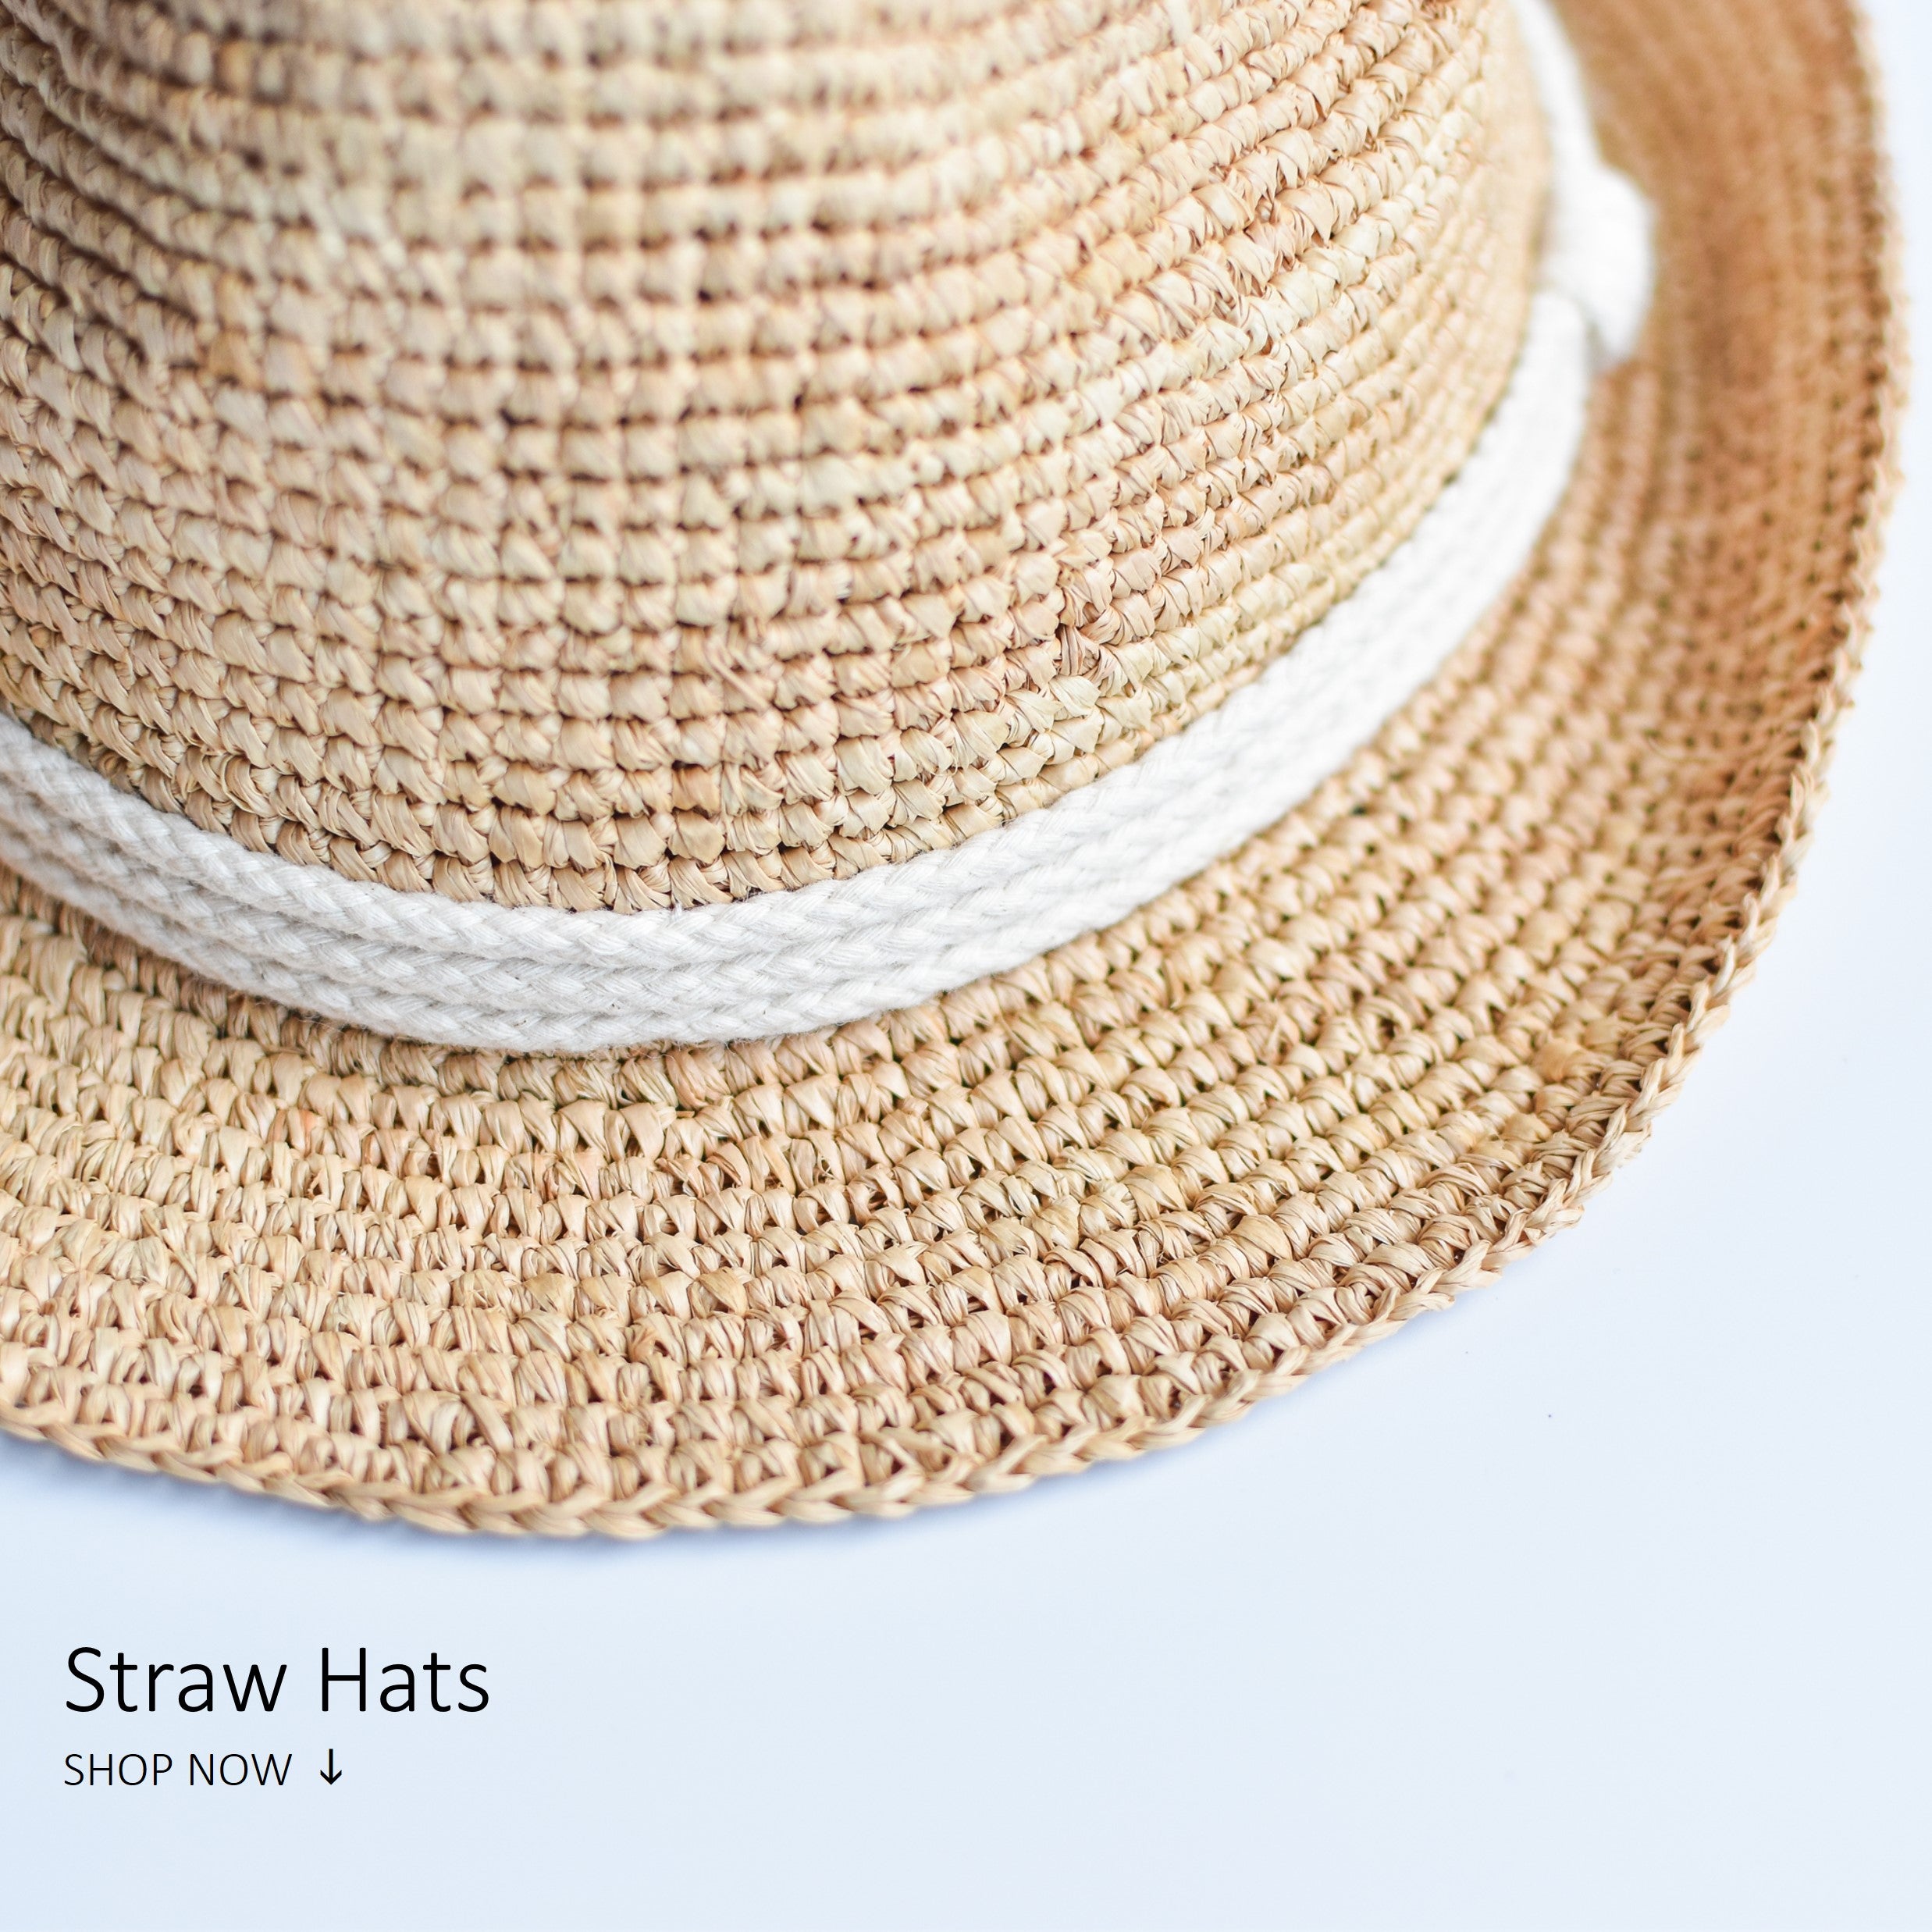 Close-up image of the Essential Raffia Straw Hat with rope band